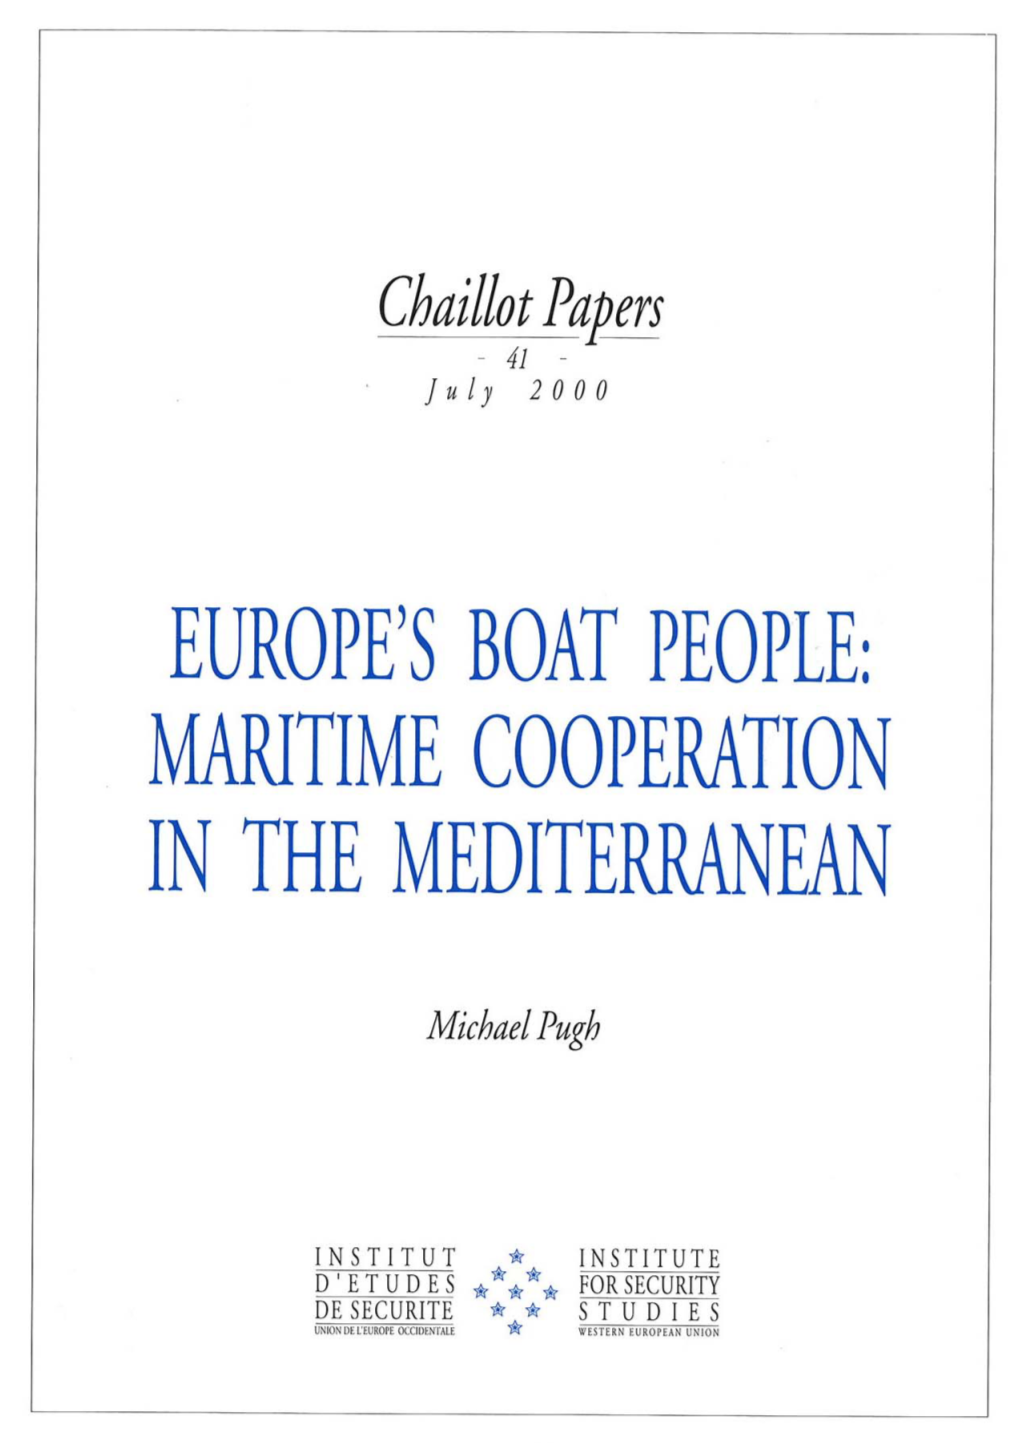 Europe's Boat People: Maritime Cooperation in the Mediterranean